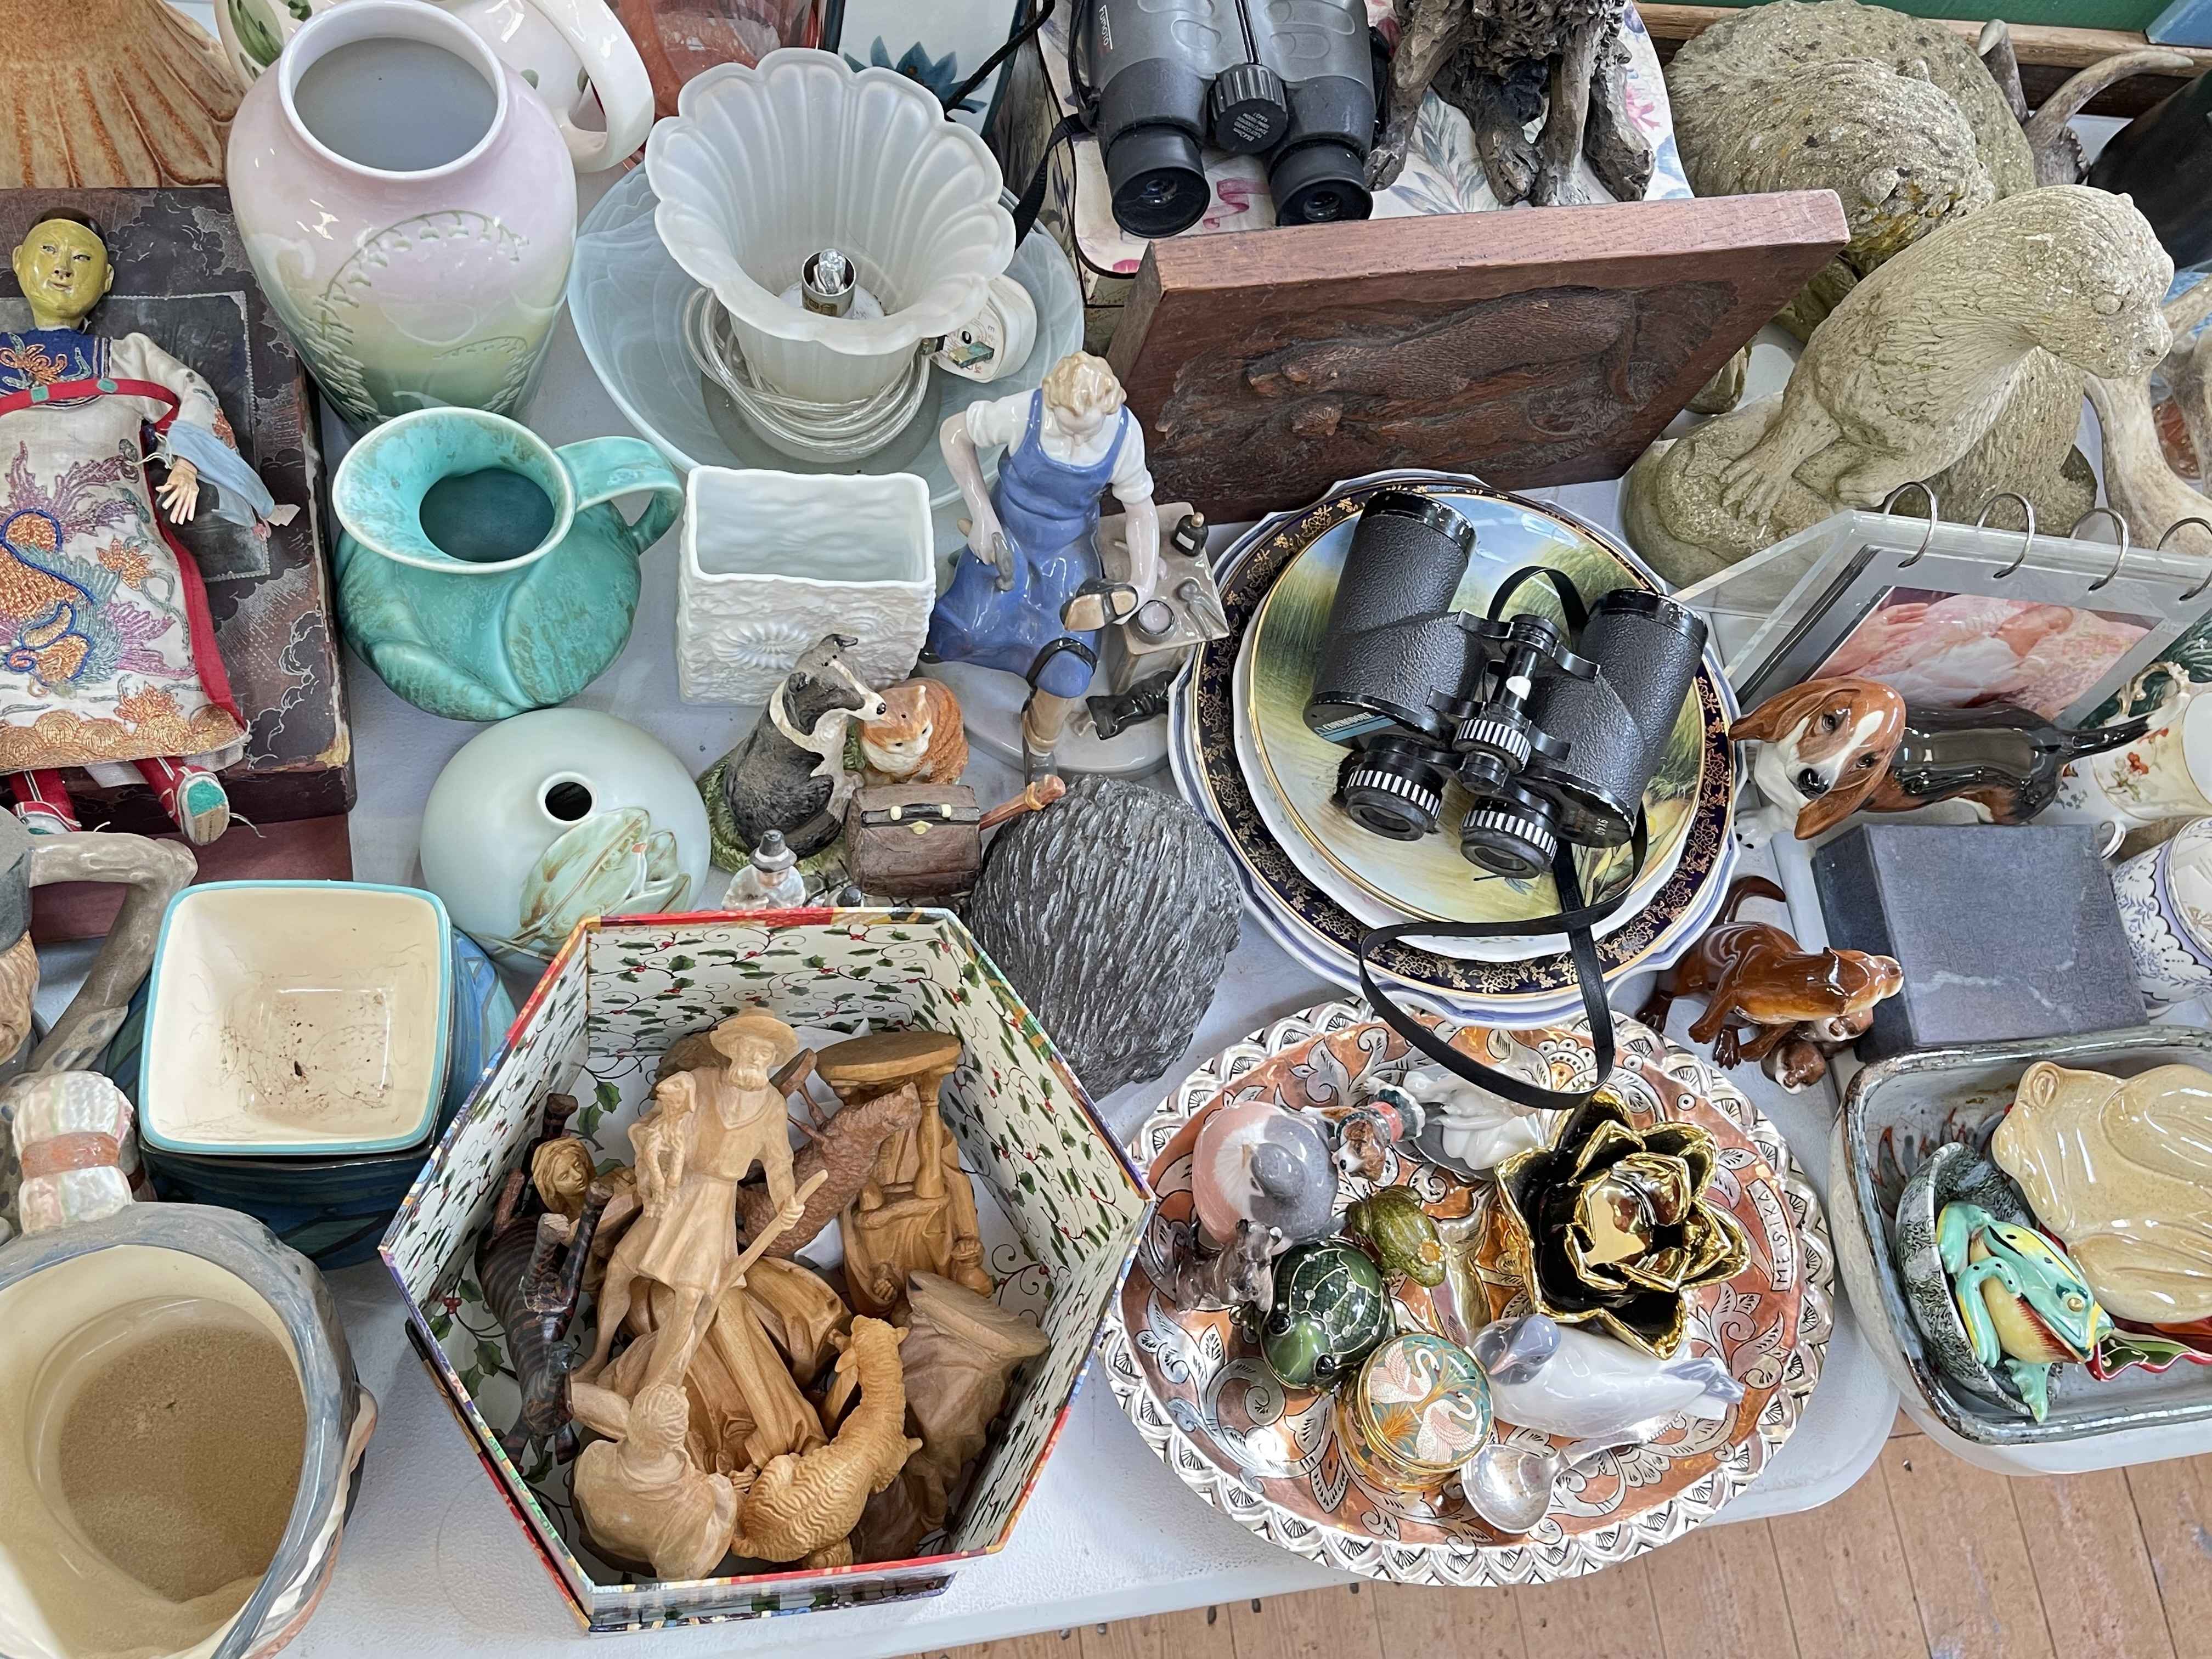 Collection of garden ornaments, toby jugs, Royal Doulton Rondelay, binoculars, plates, dolls etc. - Image 3 of 3